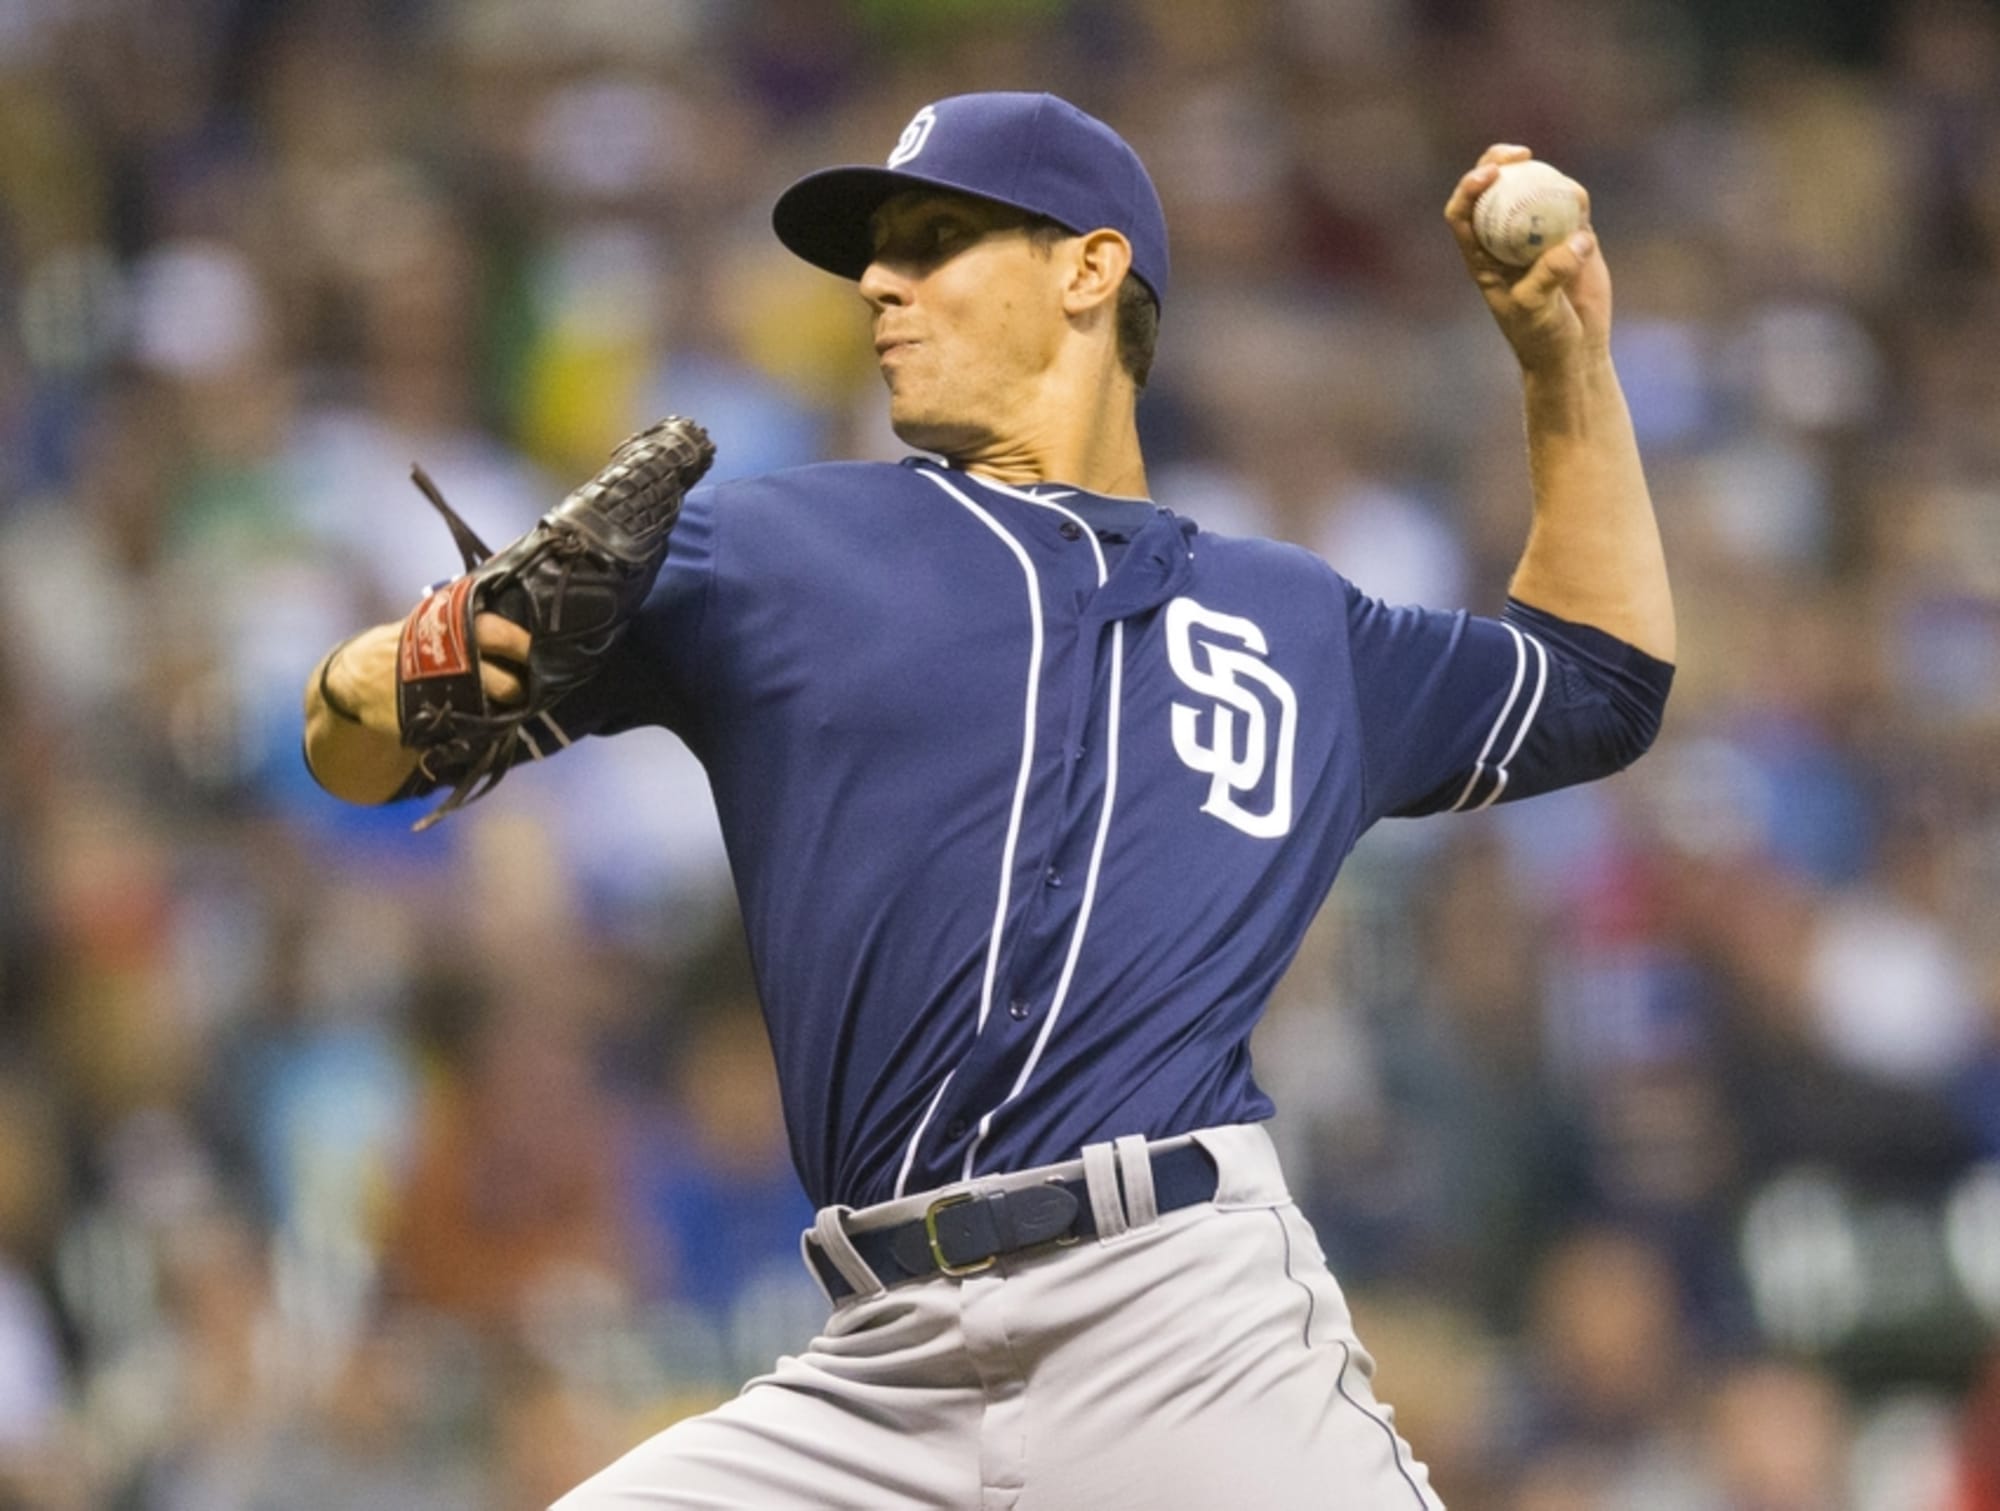 Padres Look to Slow Dodgers in home finale